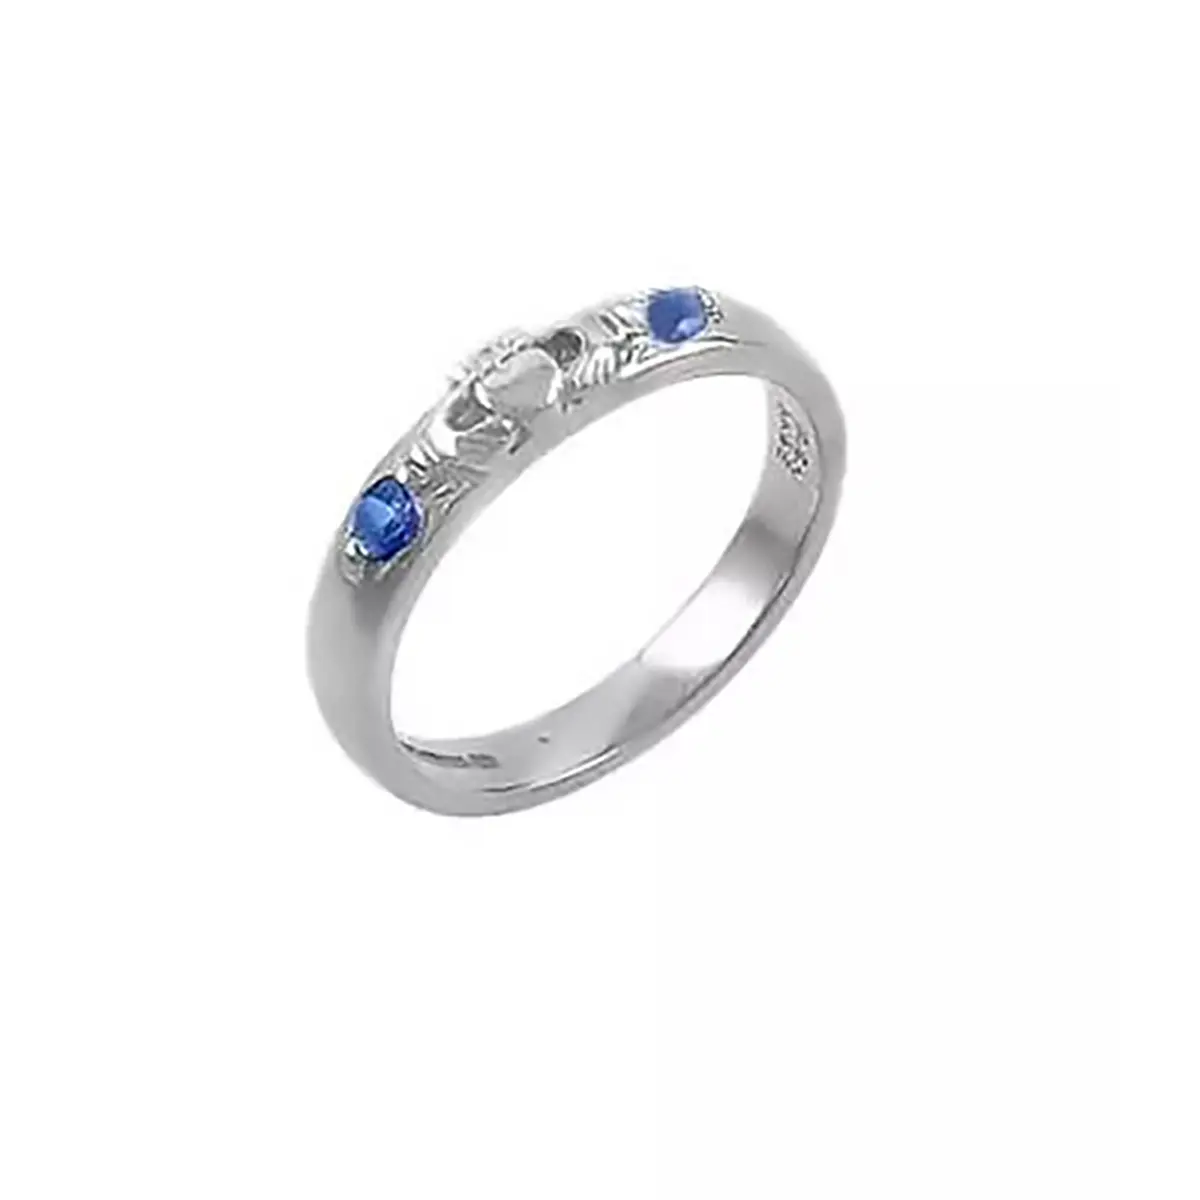 White Gold Claddagh Ring Set With 2 Sapphires...